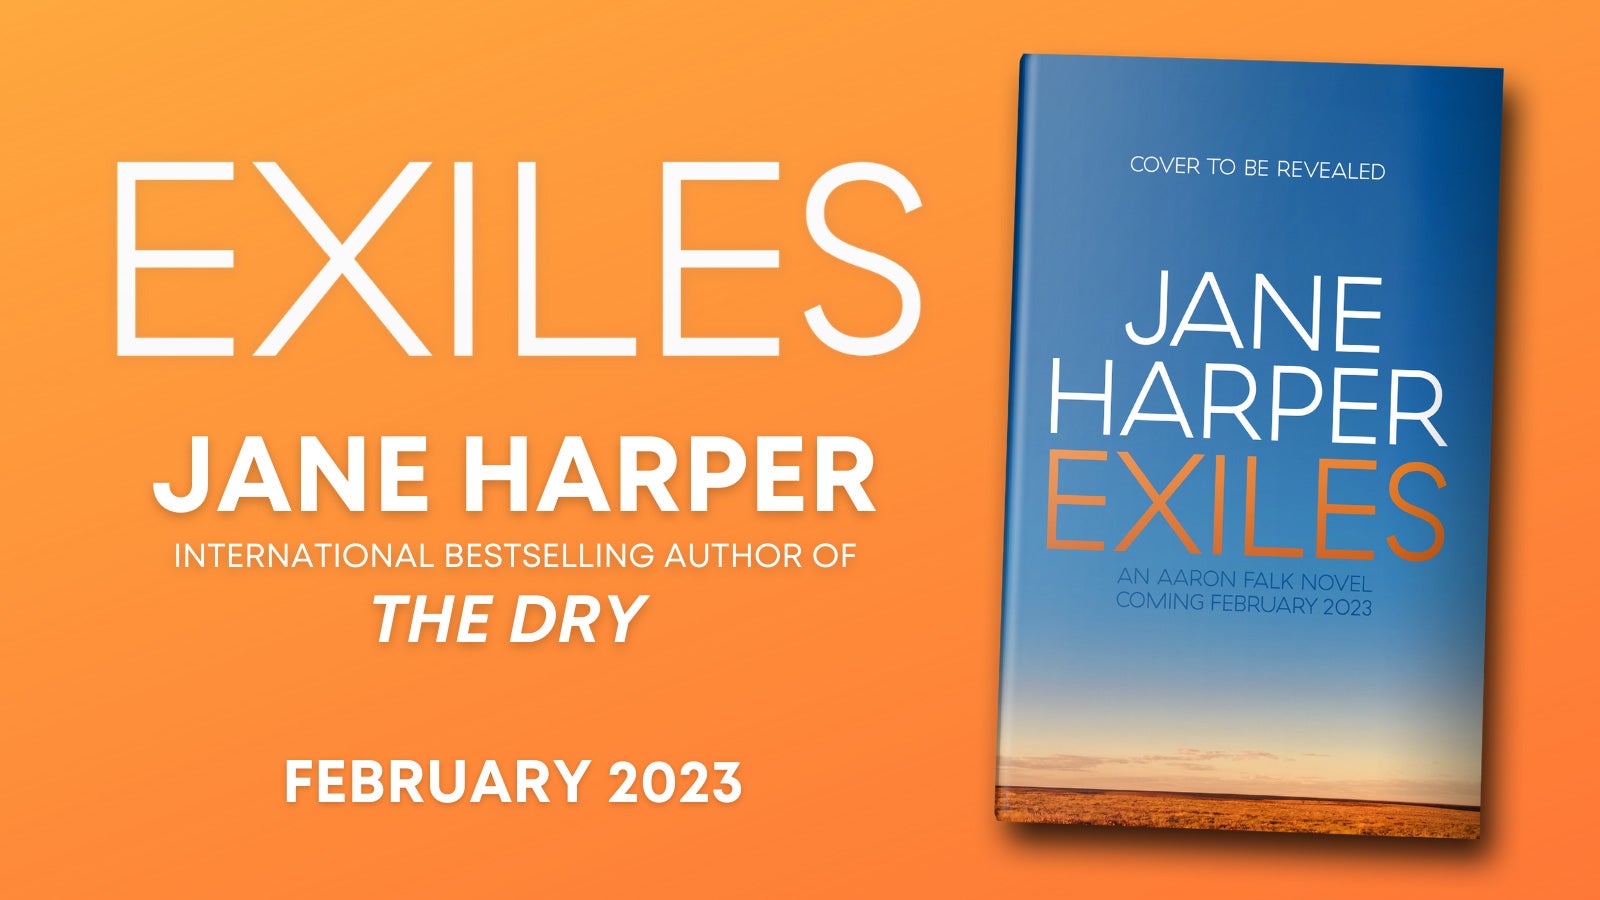 The words: Exiles, Jane Harper, International bestselling author of The Dry, February 2023, next to the book cover of Exiles which shows a clear blue sky above a desert